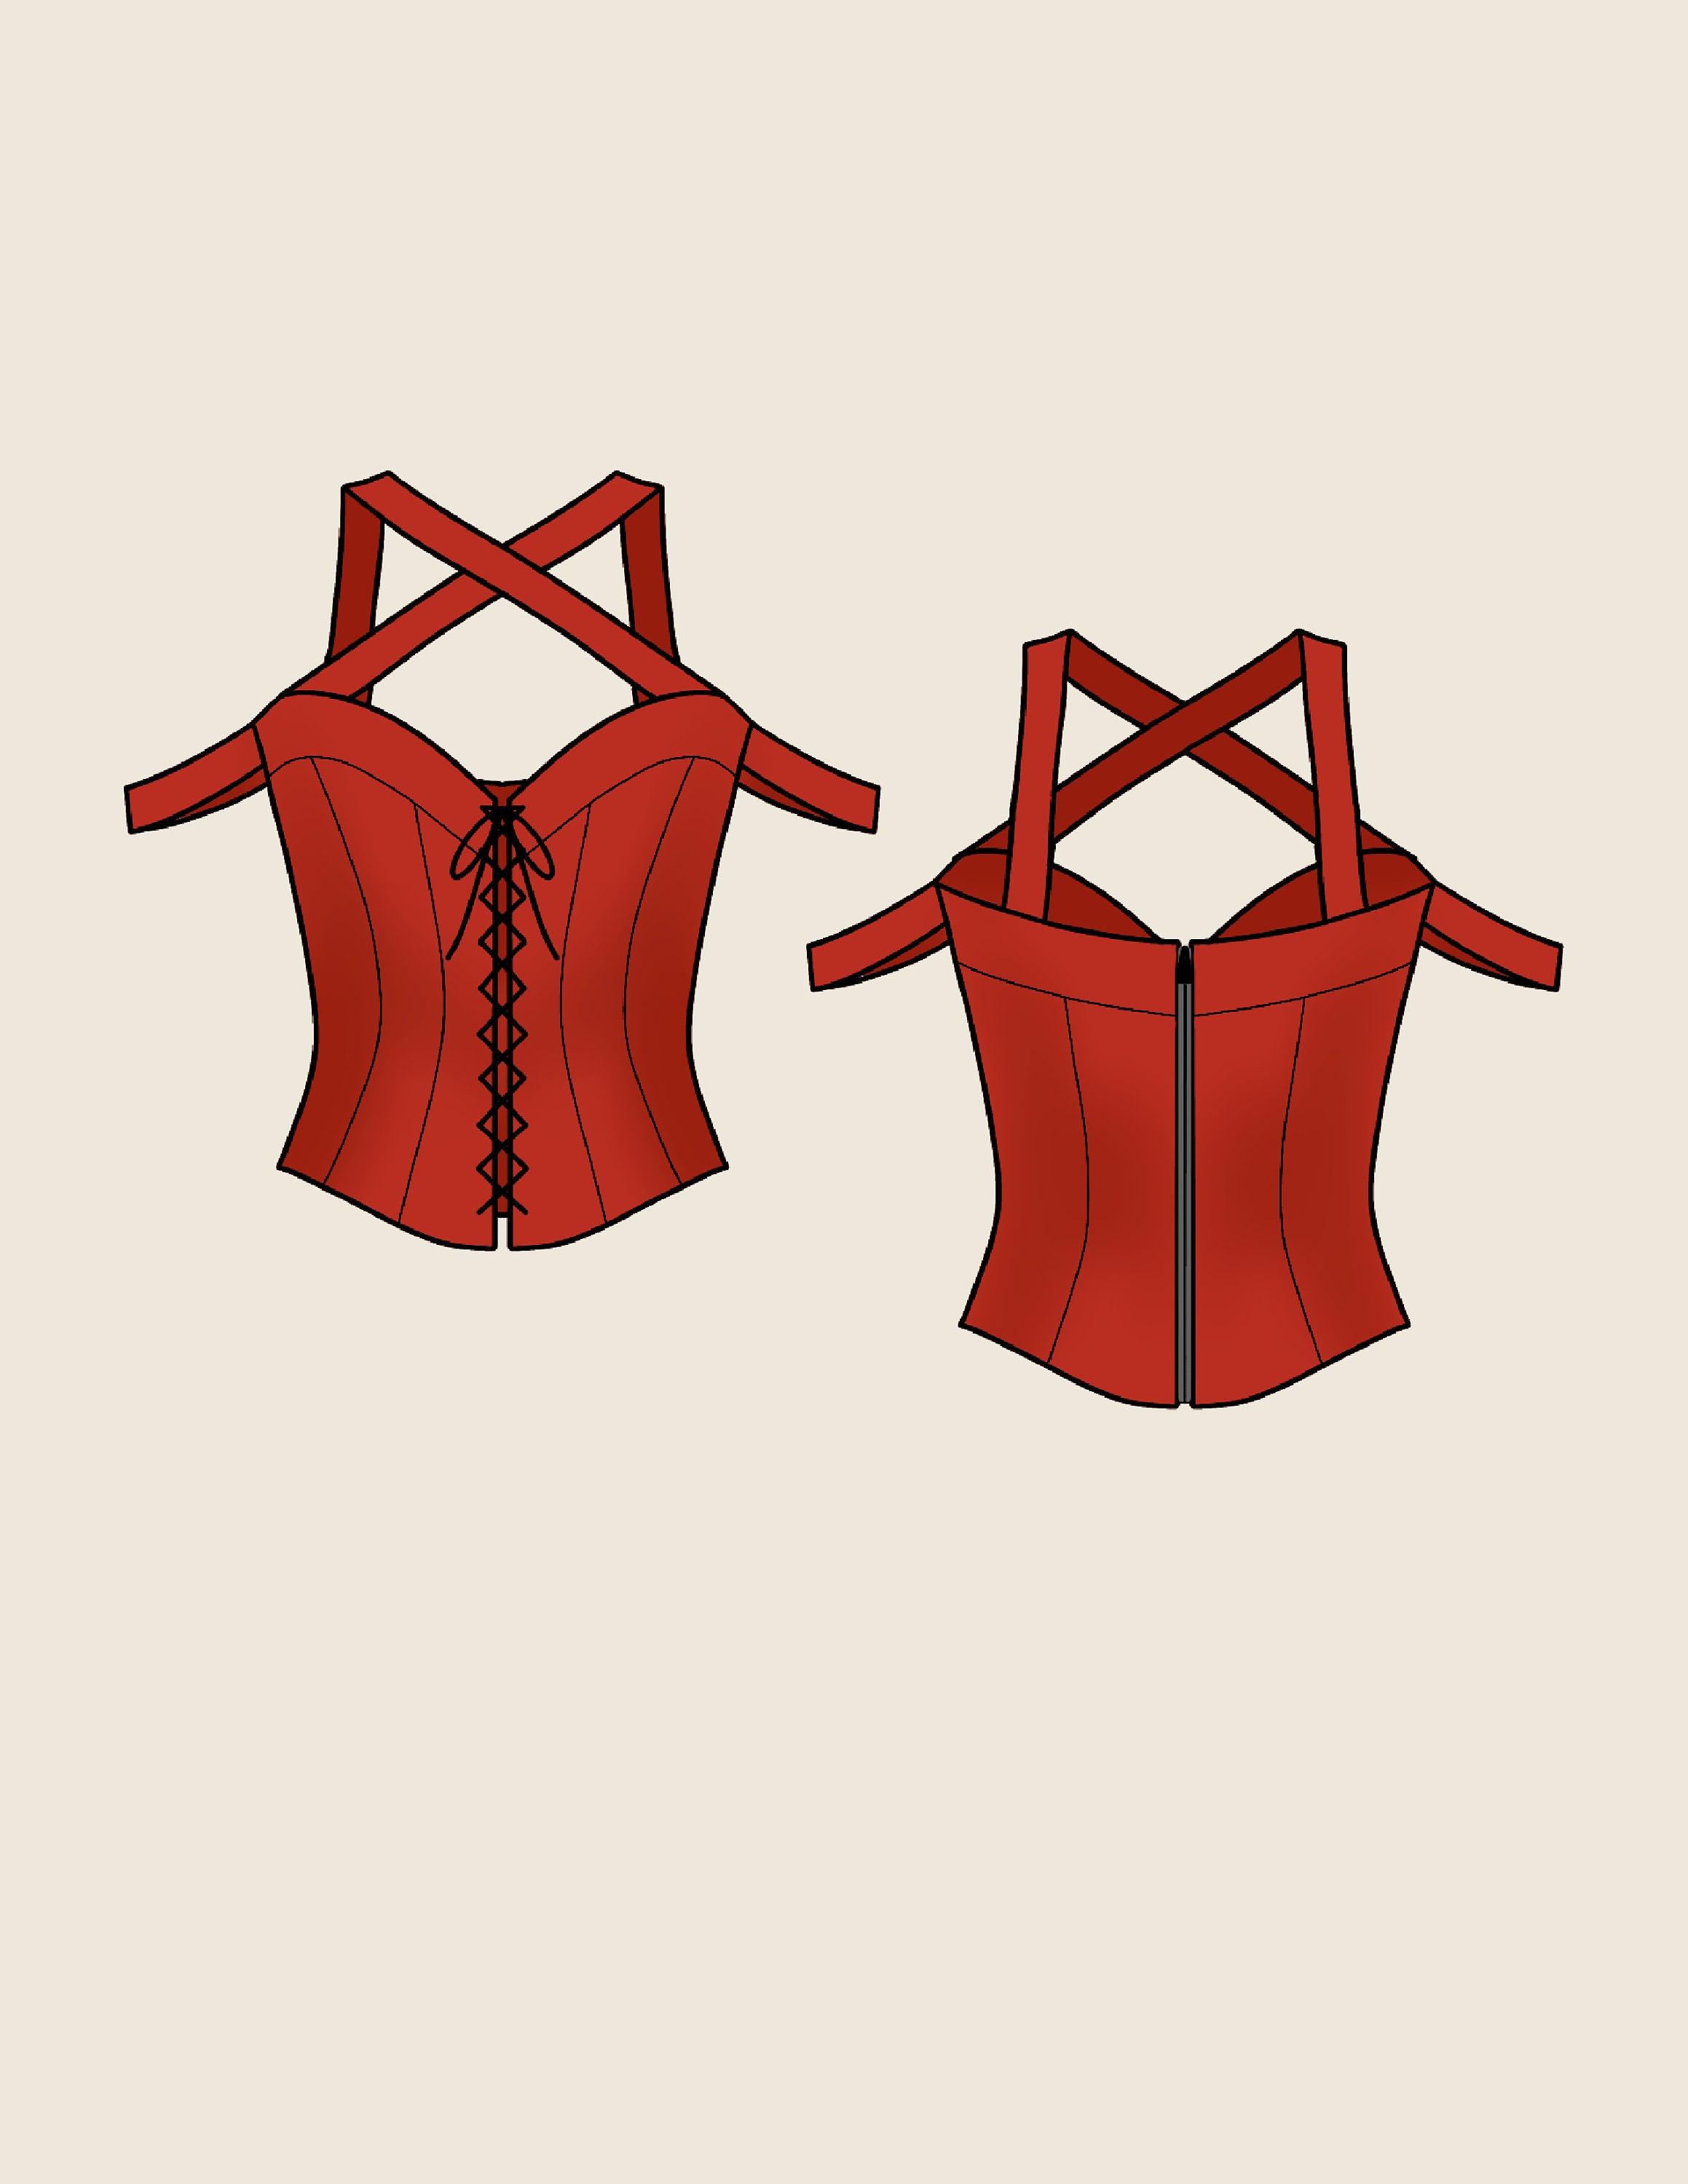 Criss-cross Corset Digital PDF Sewing Pattern // US Size 00-14 // Instant  Download With 4 Printable Sizes 